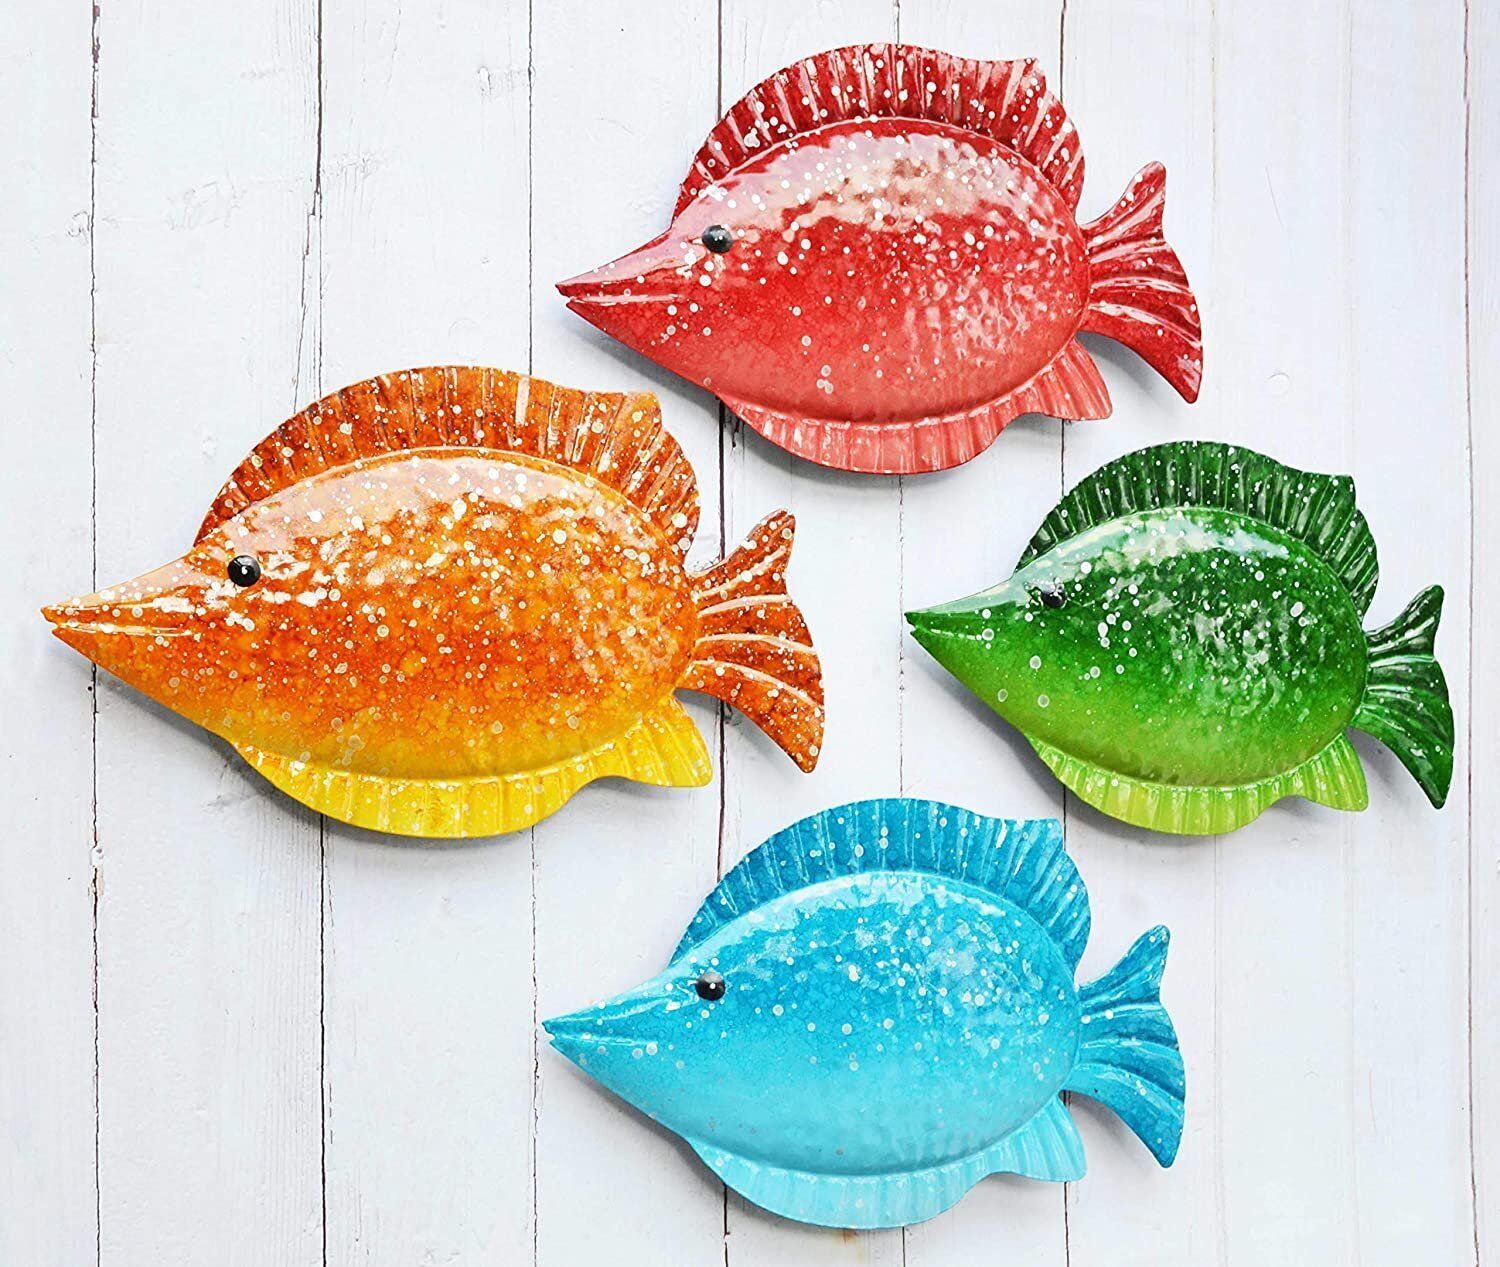 Coastal Ocean Sea Metal Fish Hanging Wall Art Decor Set Of 4 For Outdoor Or  In | Ebay Within 2017 Metal Coastal Ocean Wall Art (Gallery 16 of 20)